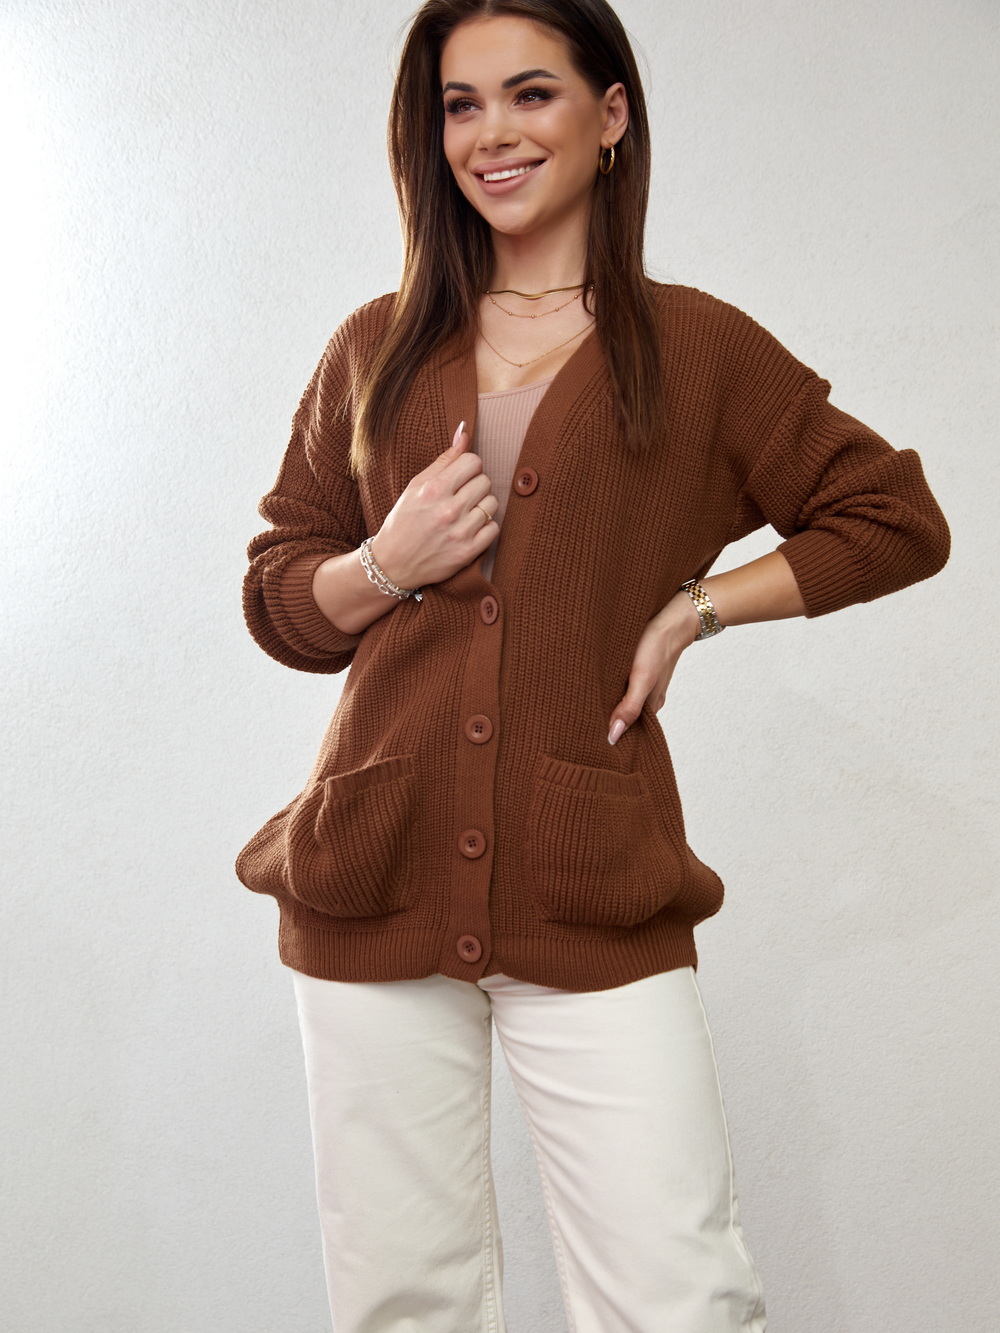 Loose women's sweater with brown buttons